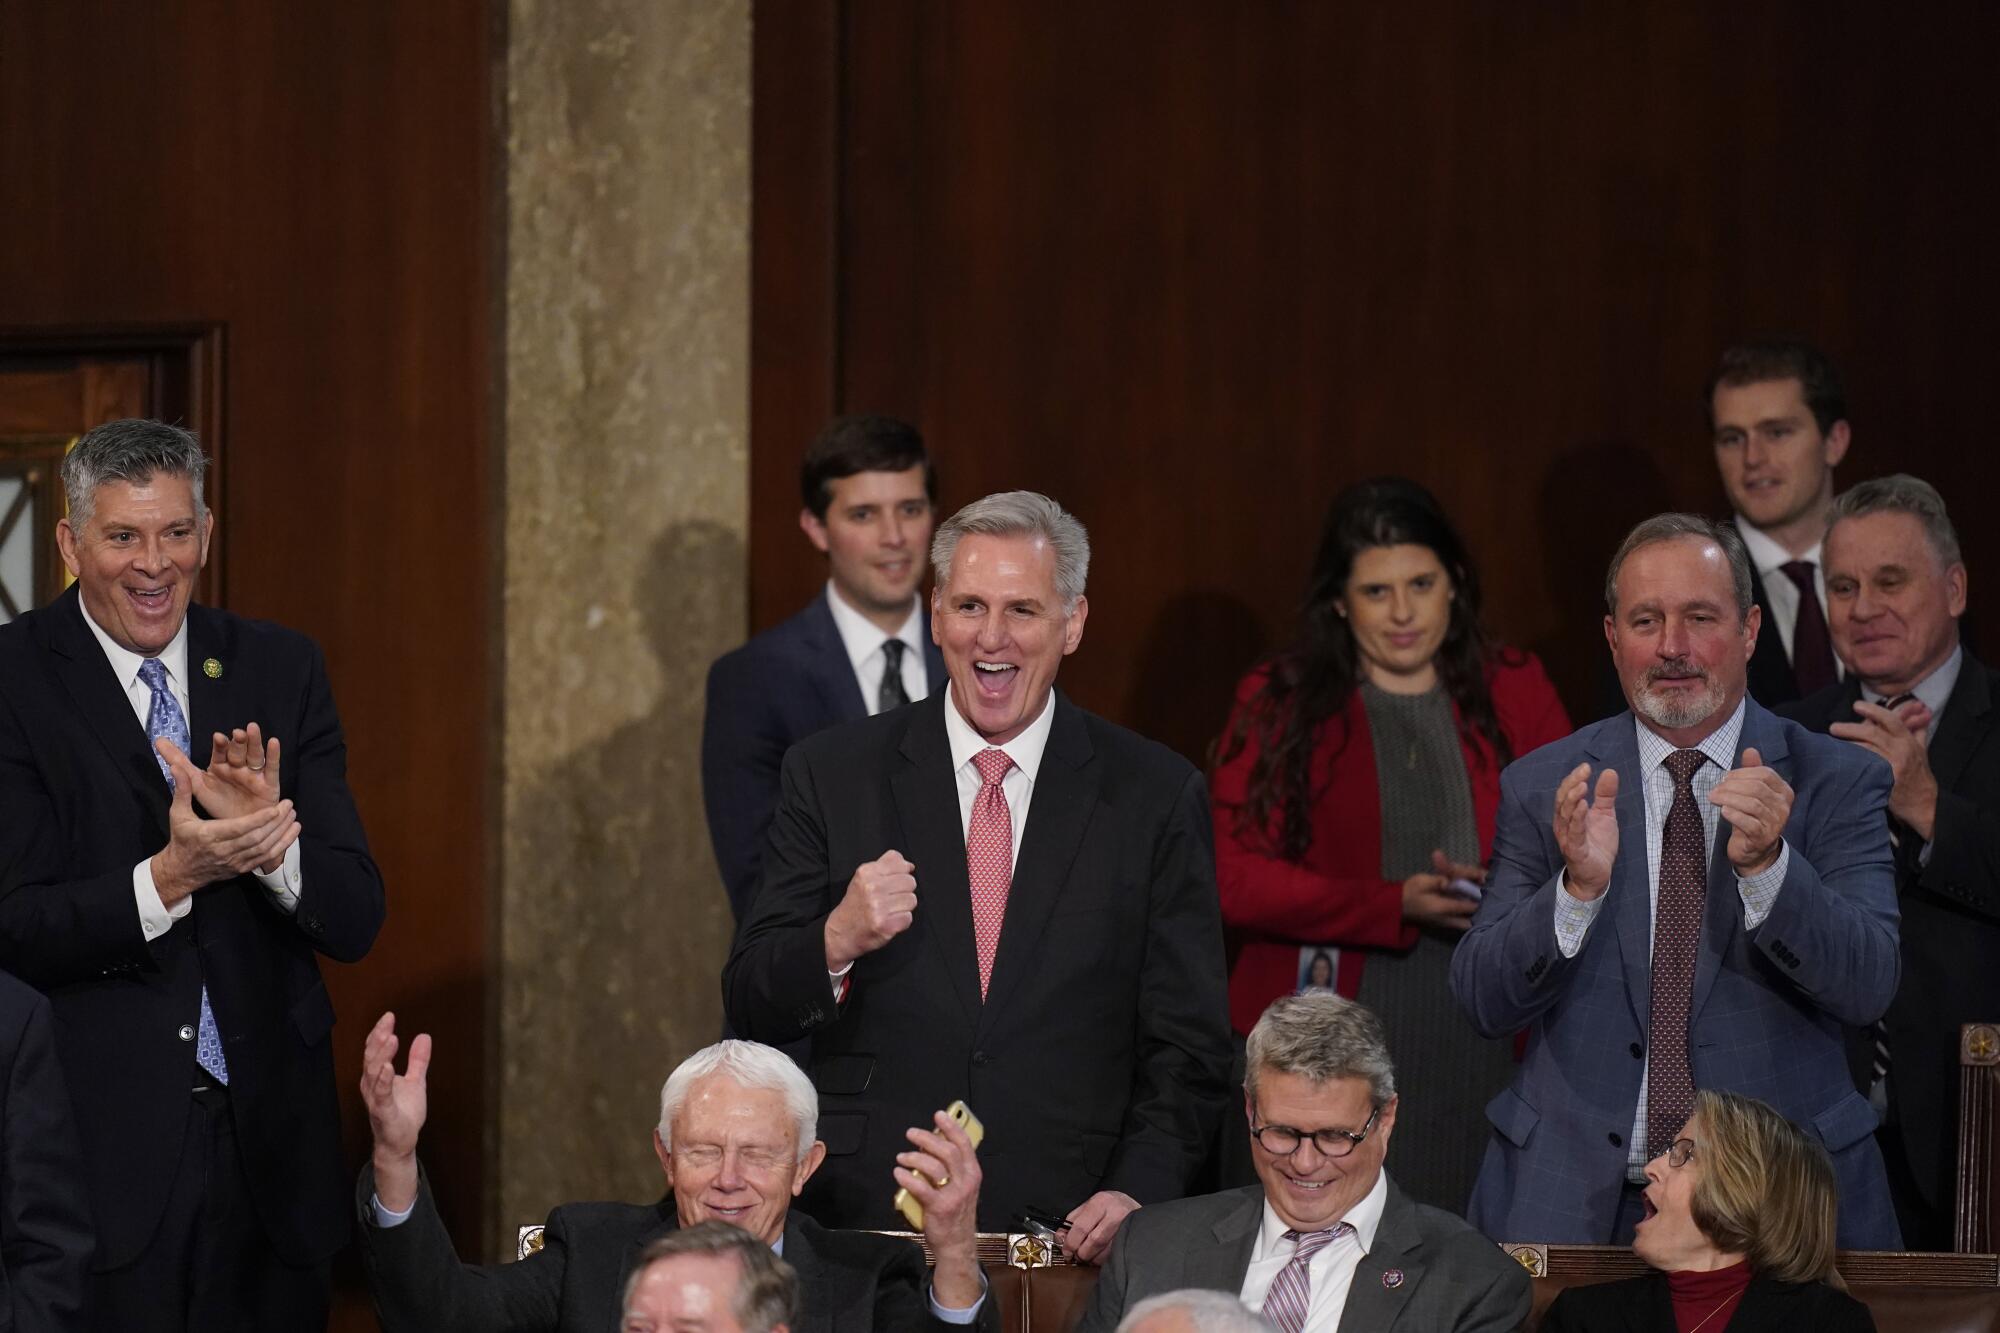 A man in a suit pumps his fist as others around him clap.